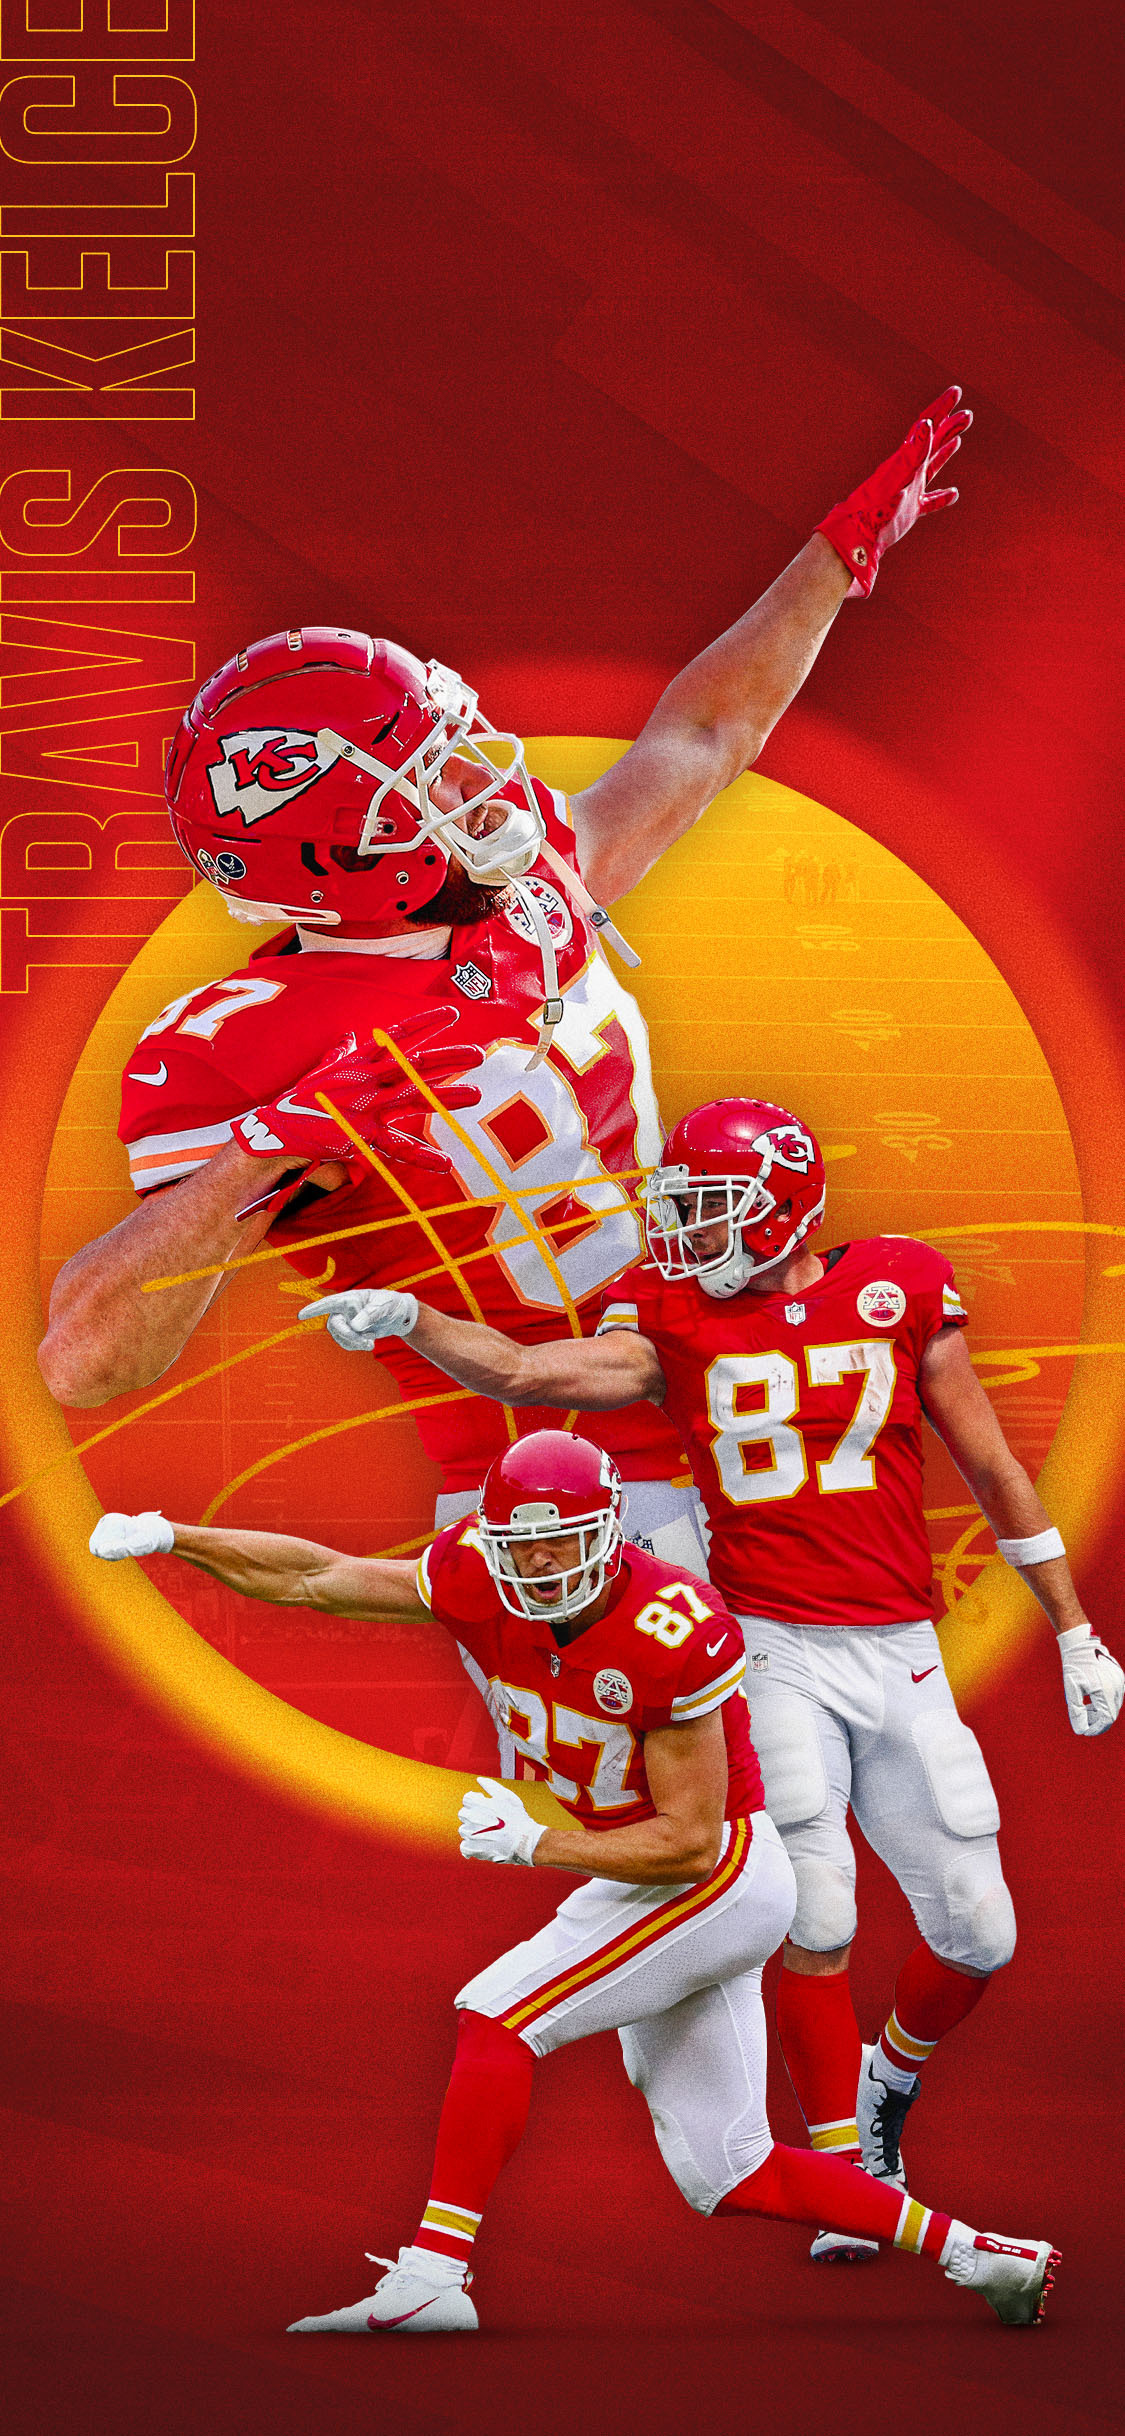 Kansas City Chiefs to vote and make this your wallpaper! #WPMOYChallenge + Kelce. #WallpaperWednesday